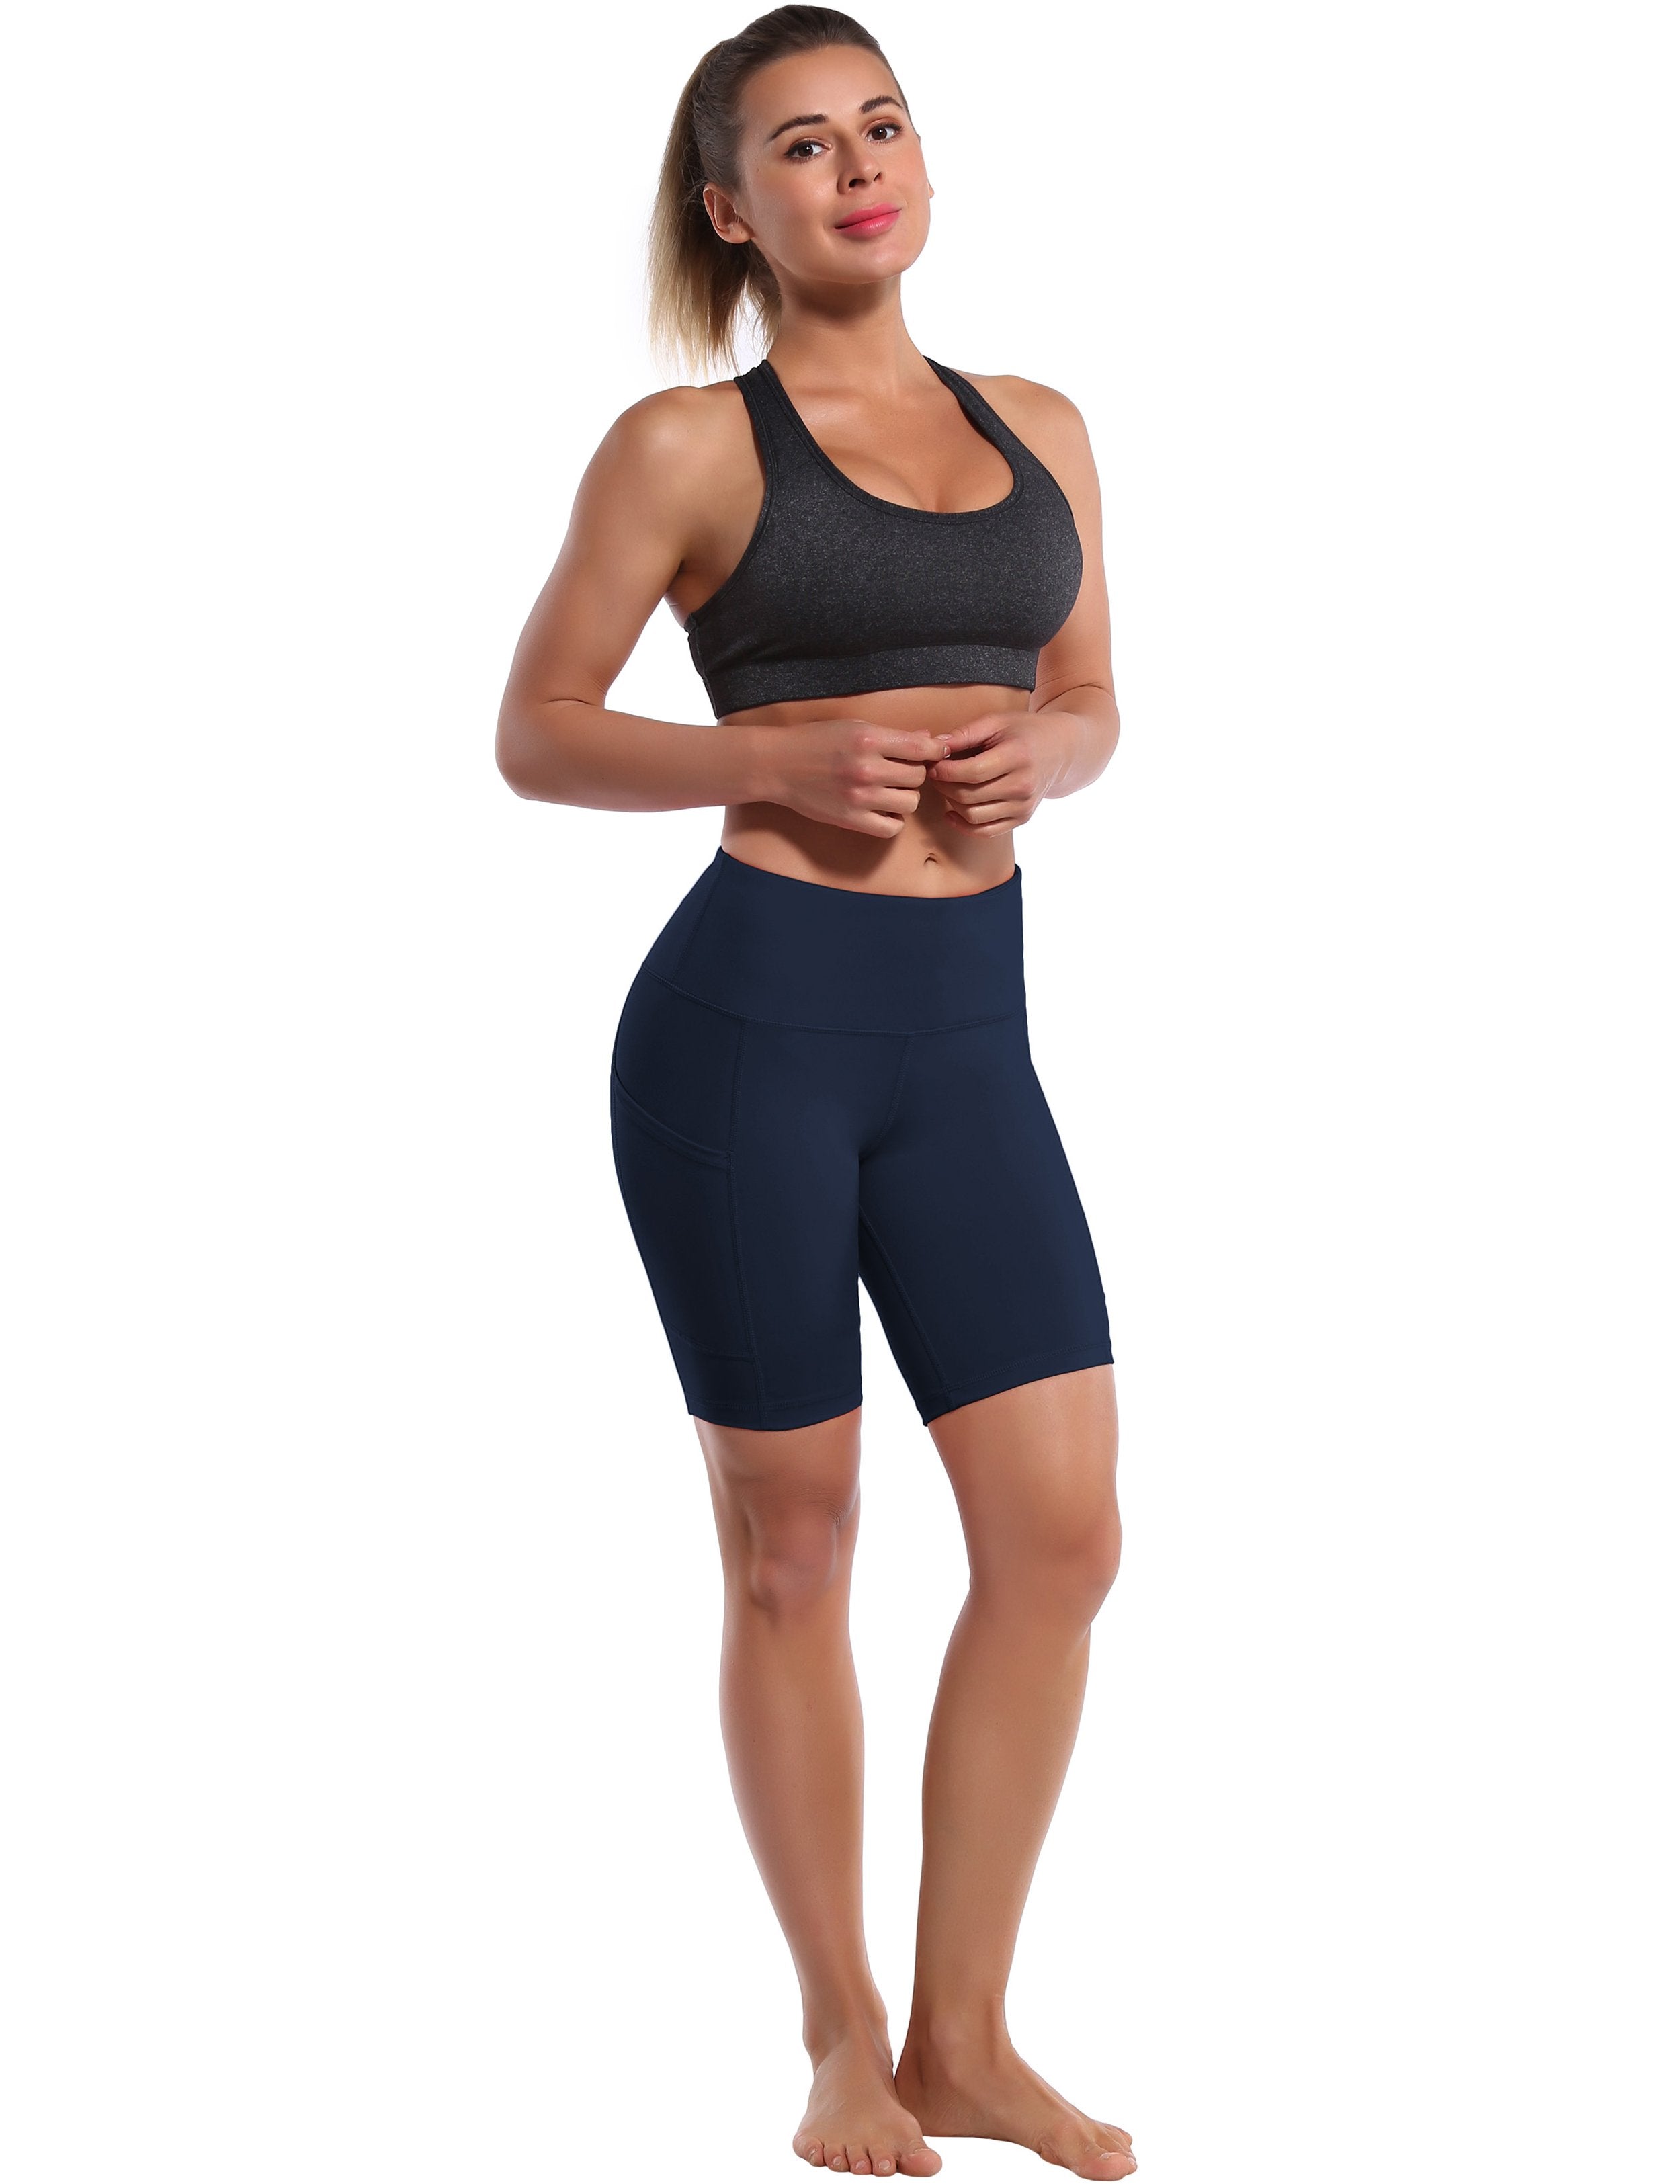 8" Side Pockets Jogging Shorts darknavy Sleek, soft, smooth and totally comfortable: our newest style is here. Softest-ever fabric High elasticity High density 4-way stretch Fabric doesn't attract lint easily No see-through Moisture-wicking Machine wash 75% Nylon, 25% Spandex